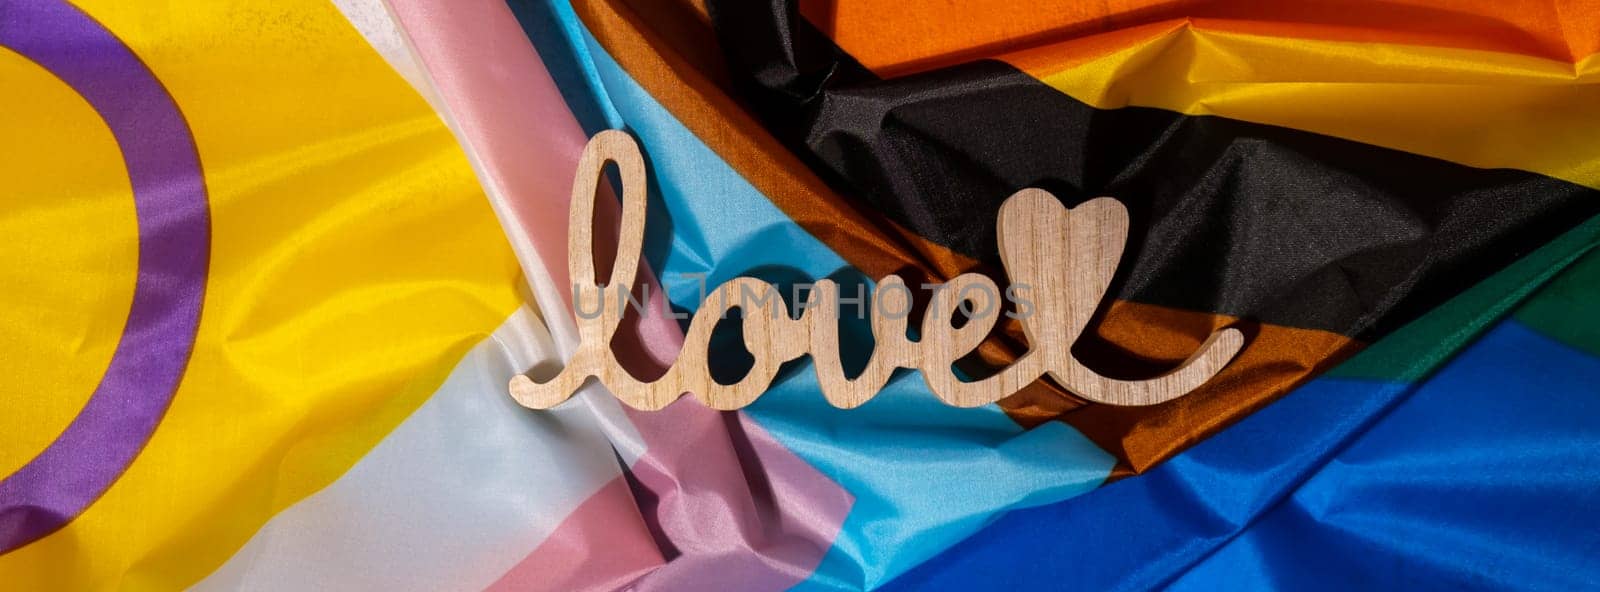 Banner Wooden word love with heart romance on Rainbow LGBTQIA flag made from silk material. Valentine's Day greeting card. Symbol of LGBTQ pride month. Equal rights. Peace and freedom. Support LGBTQIA community. Diversity equality